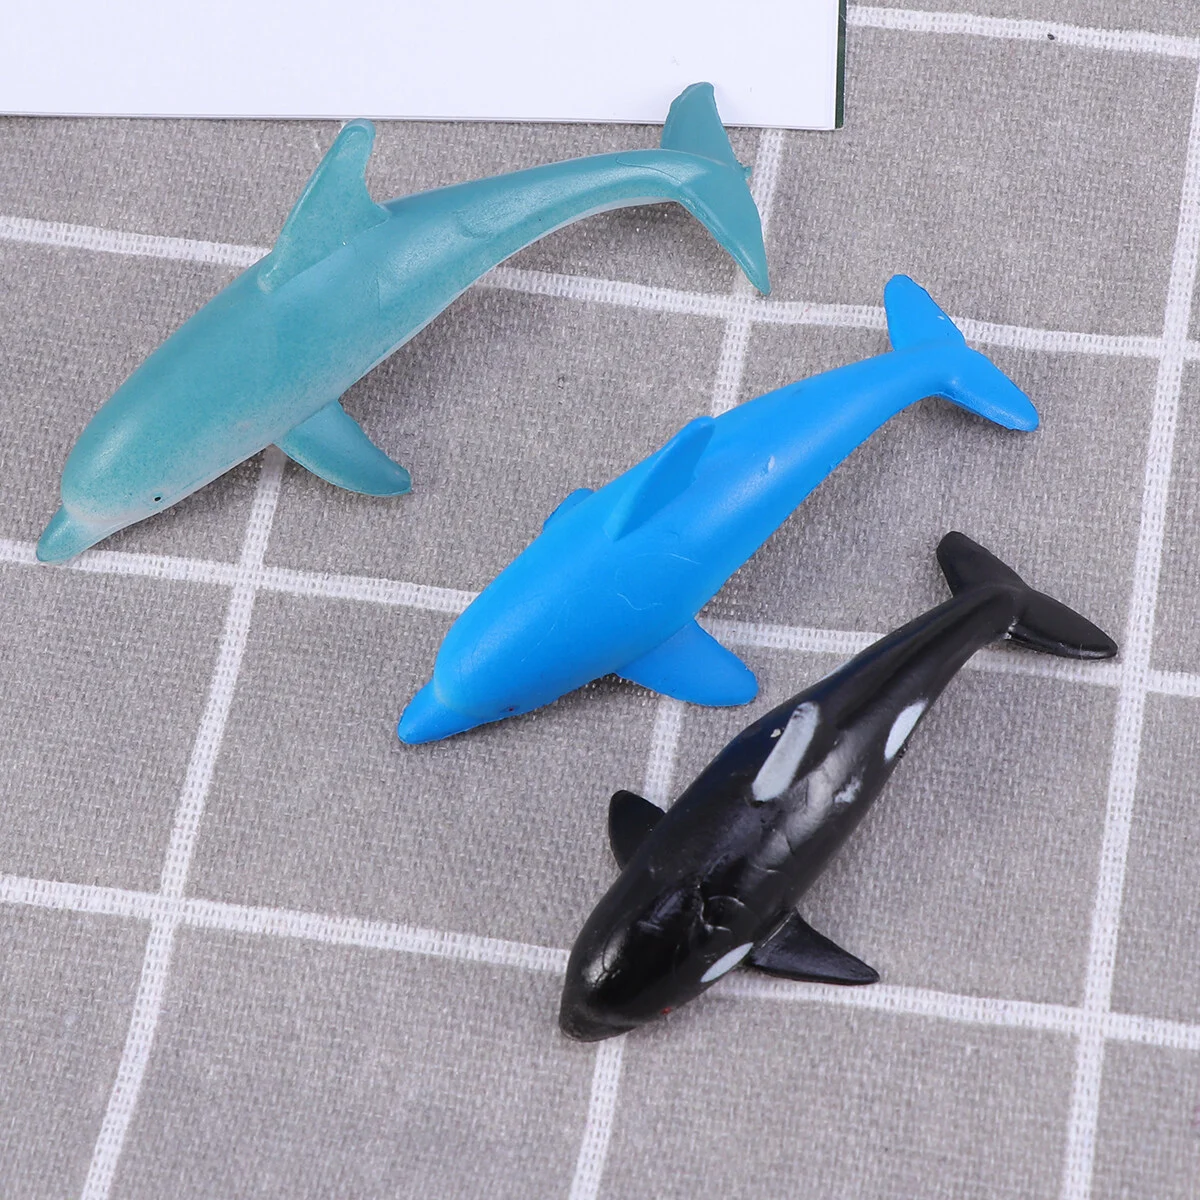 

24pcs Animals Figures Realistic Ocean Sharks Turtle Model Creature for Home Shop Birthday Party